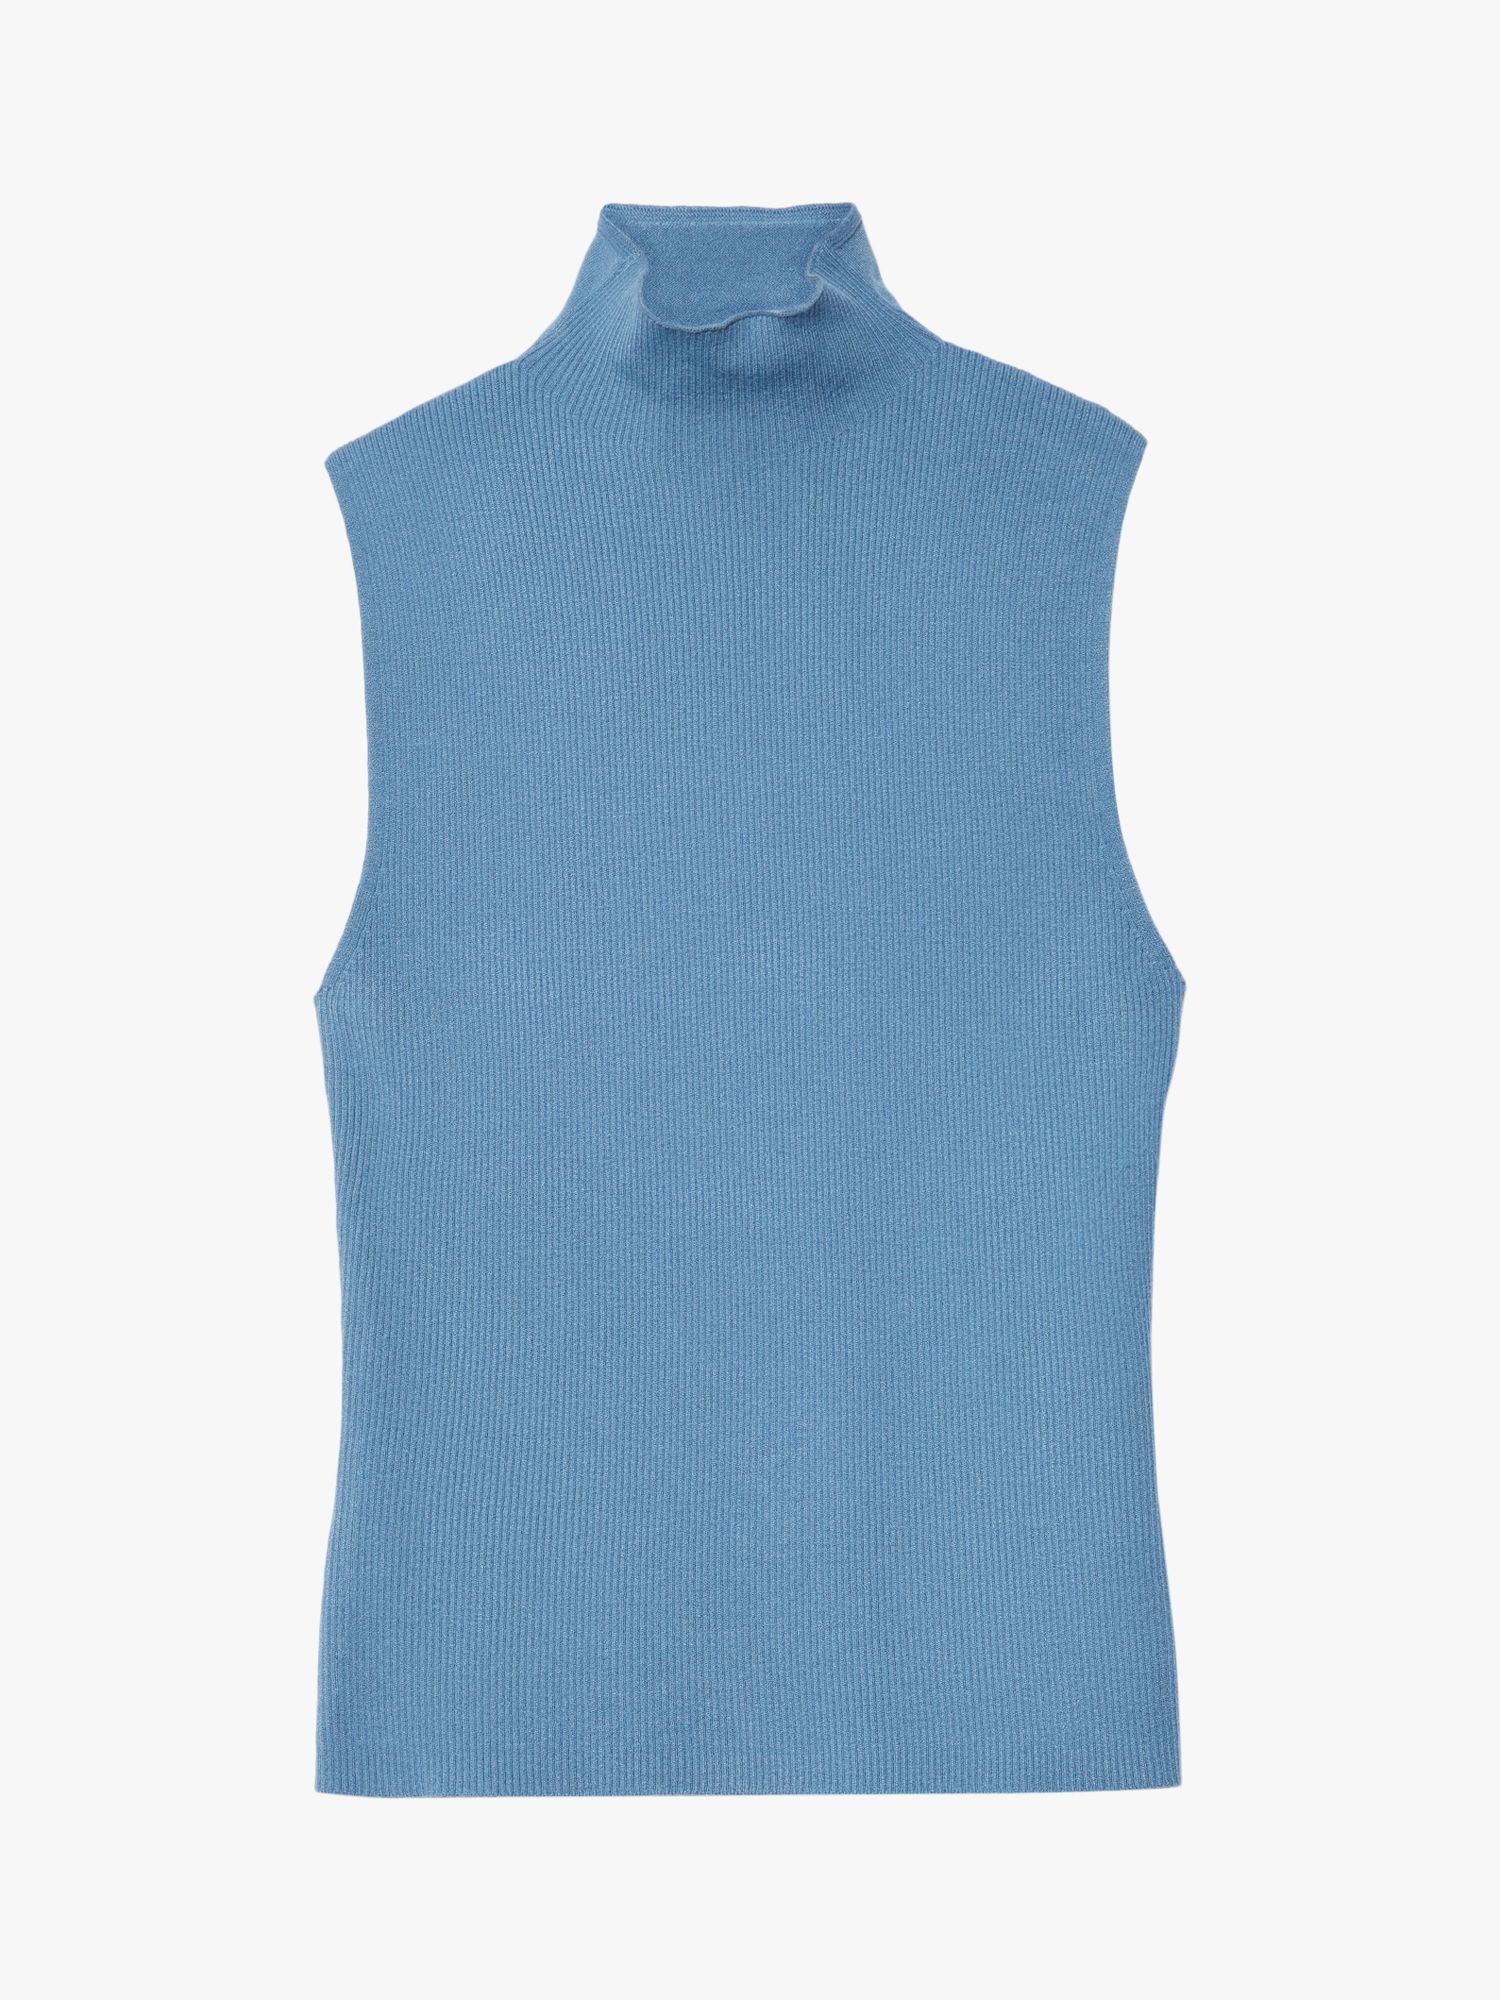 Buy SISLEY High Neck Knitted Sleeveless Top Online at johnlewis.com